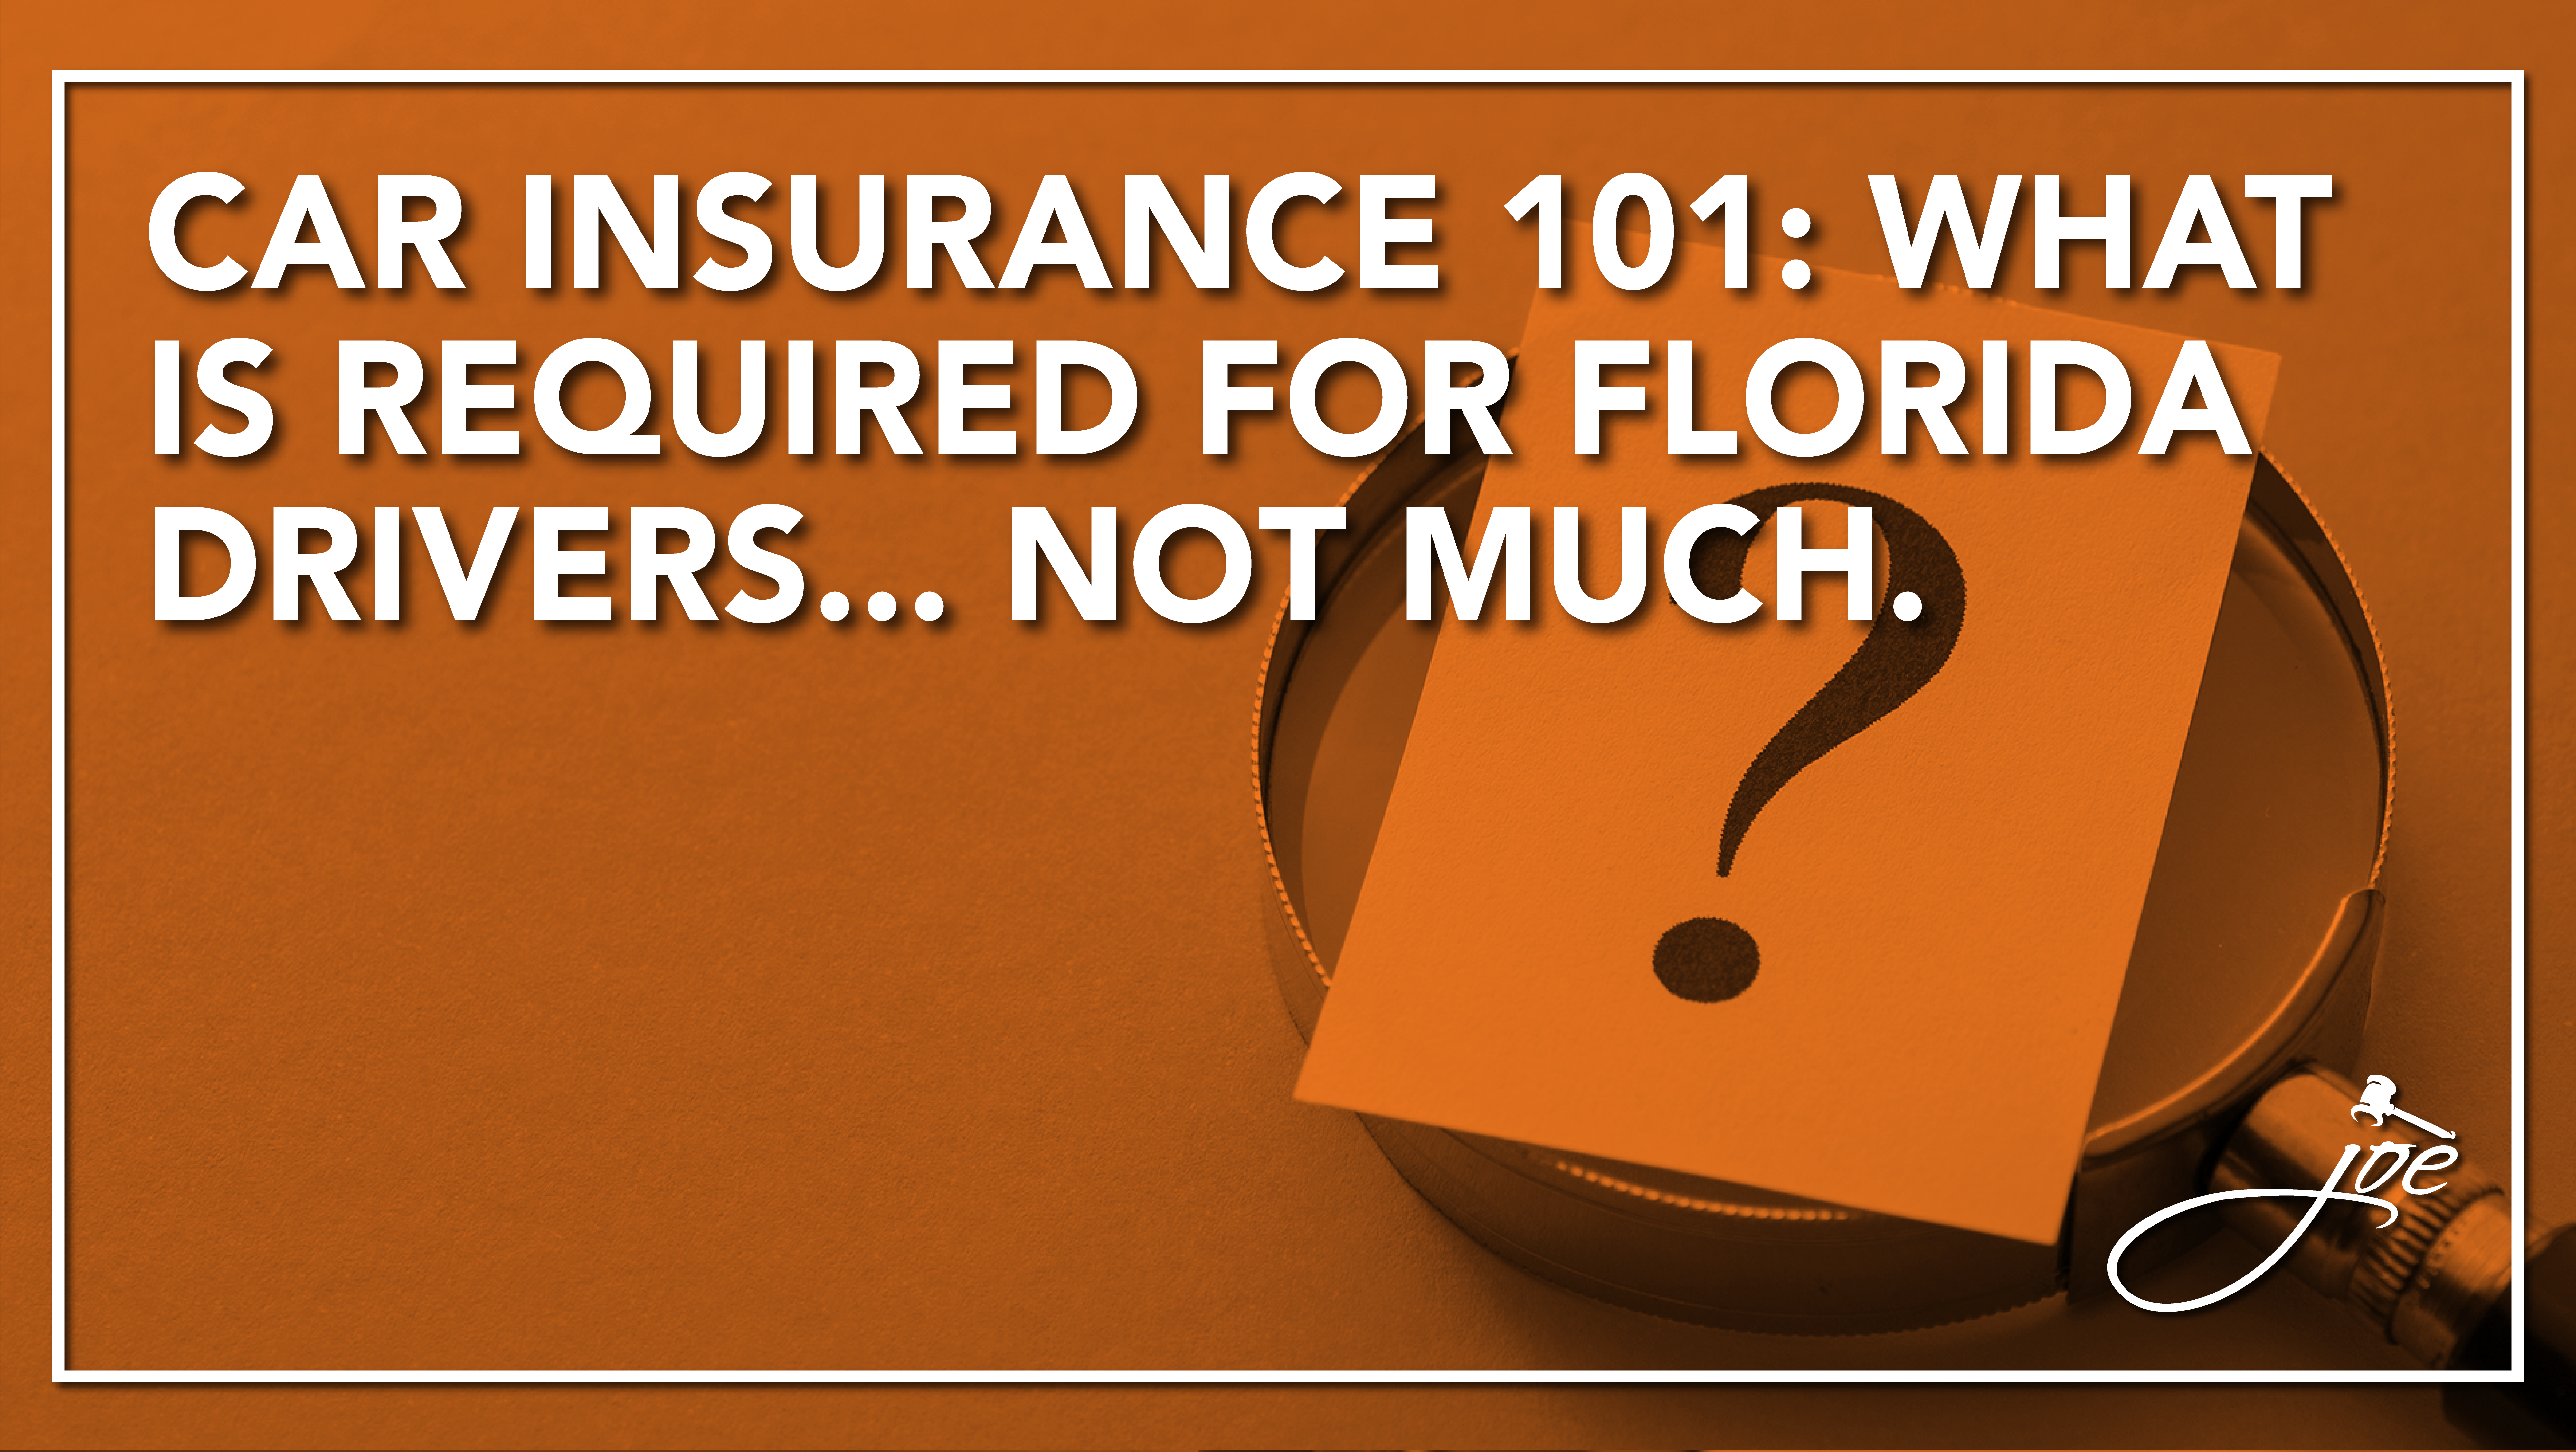 Florida Car Insurance 101: Yes, It’s Legal For A Florida Resident To Register And Drive A Car That Has Zero Insurance For Your Injuries Caused By Their Car?